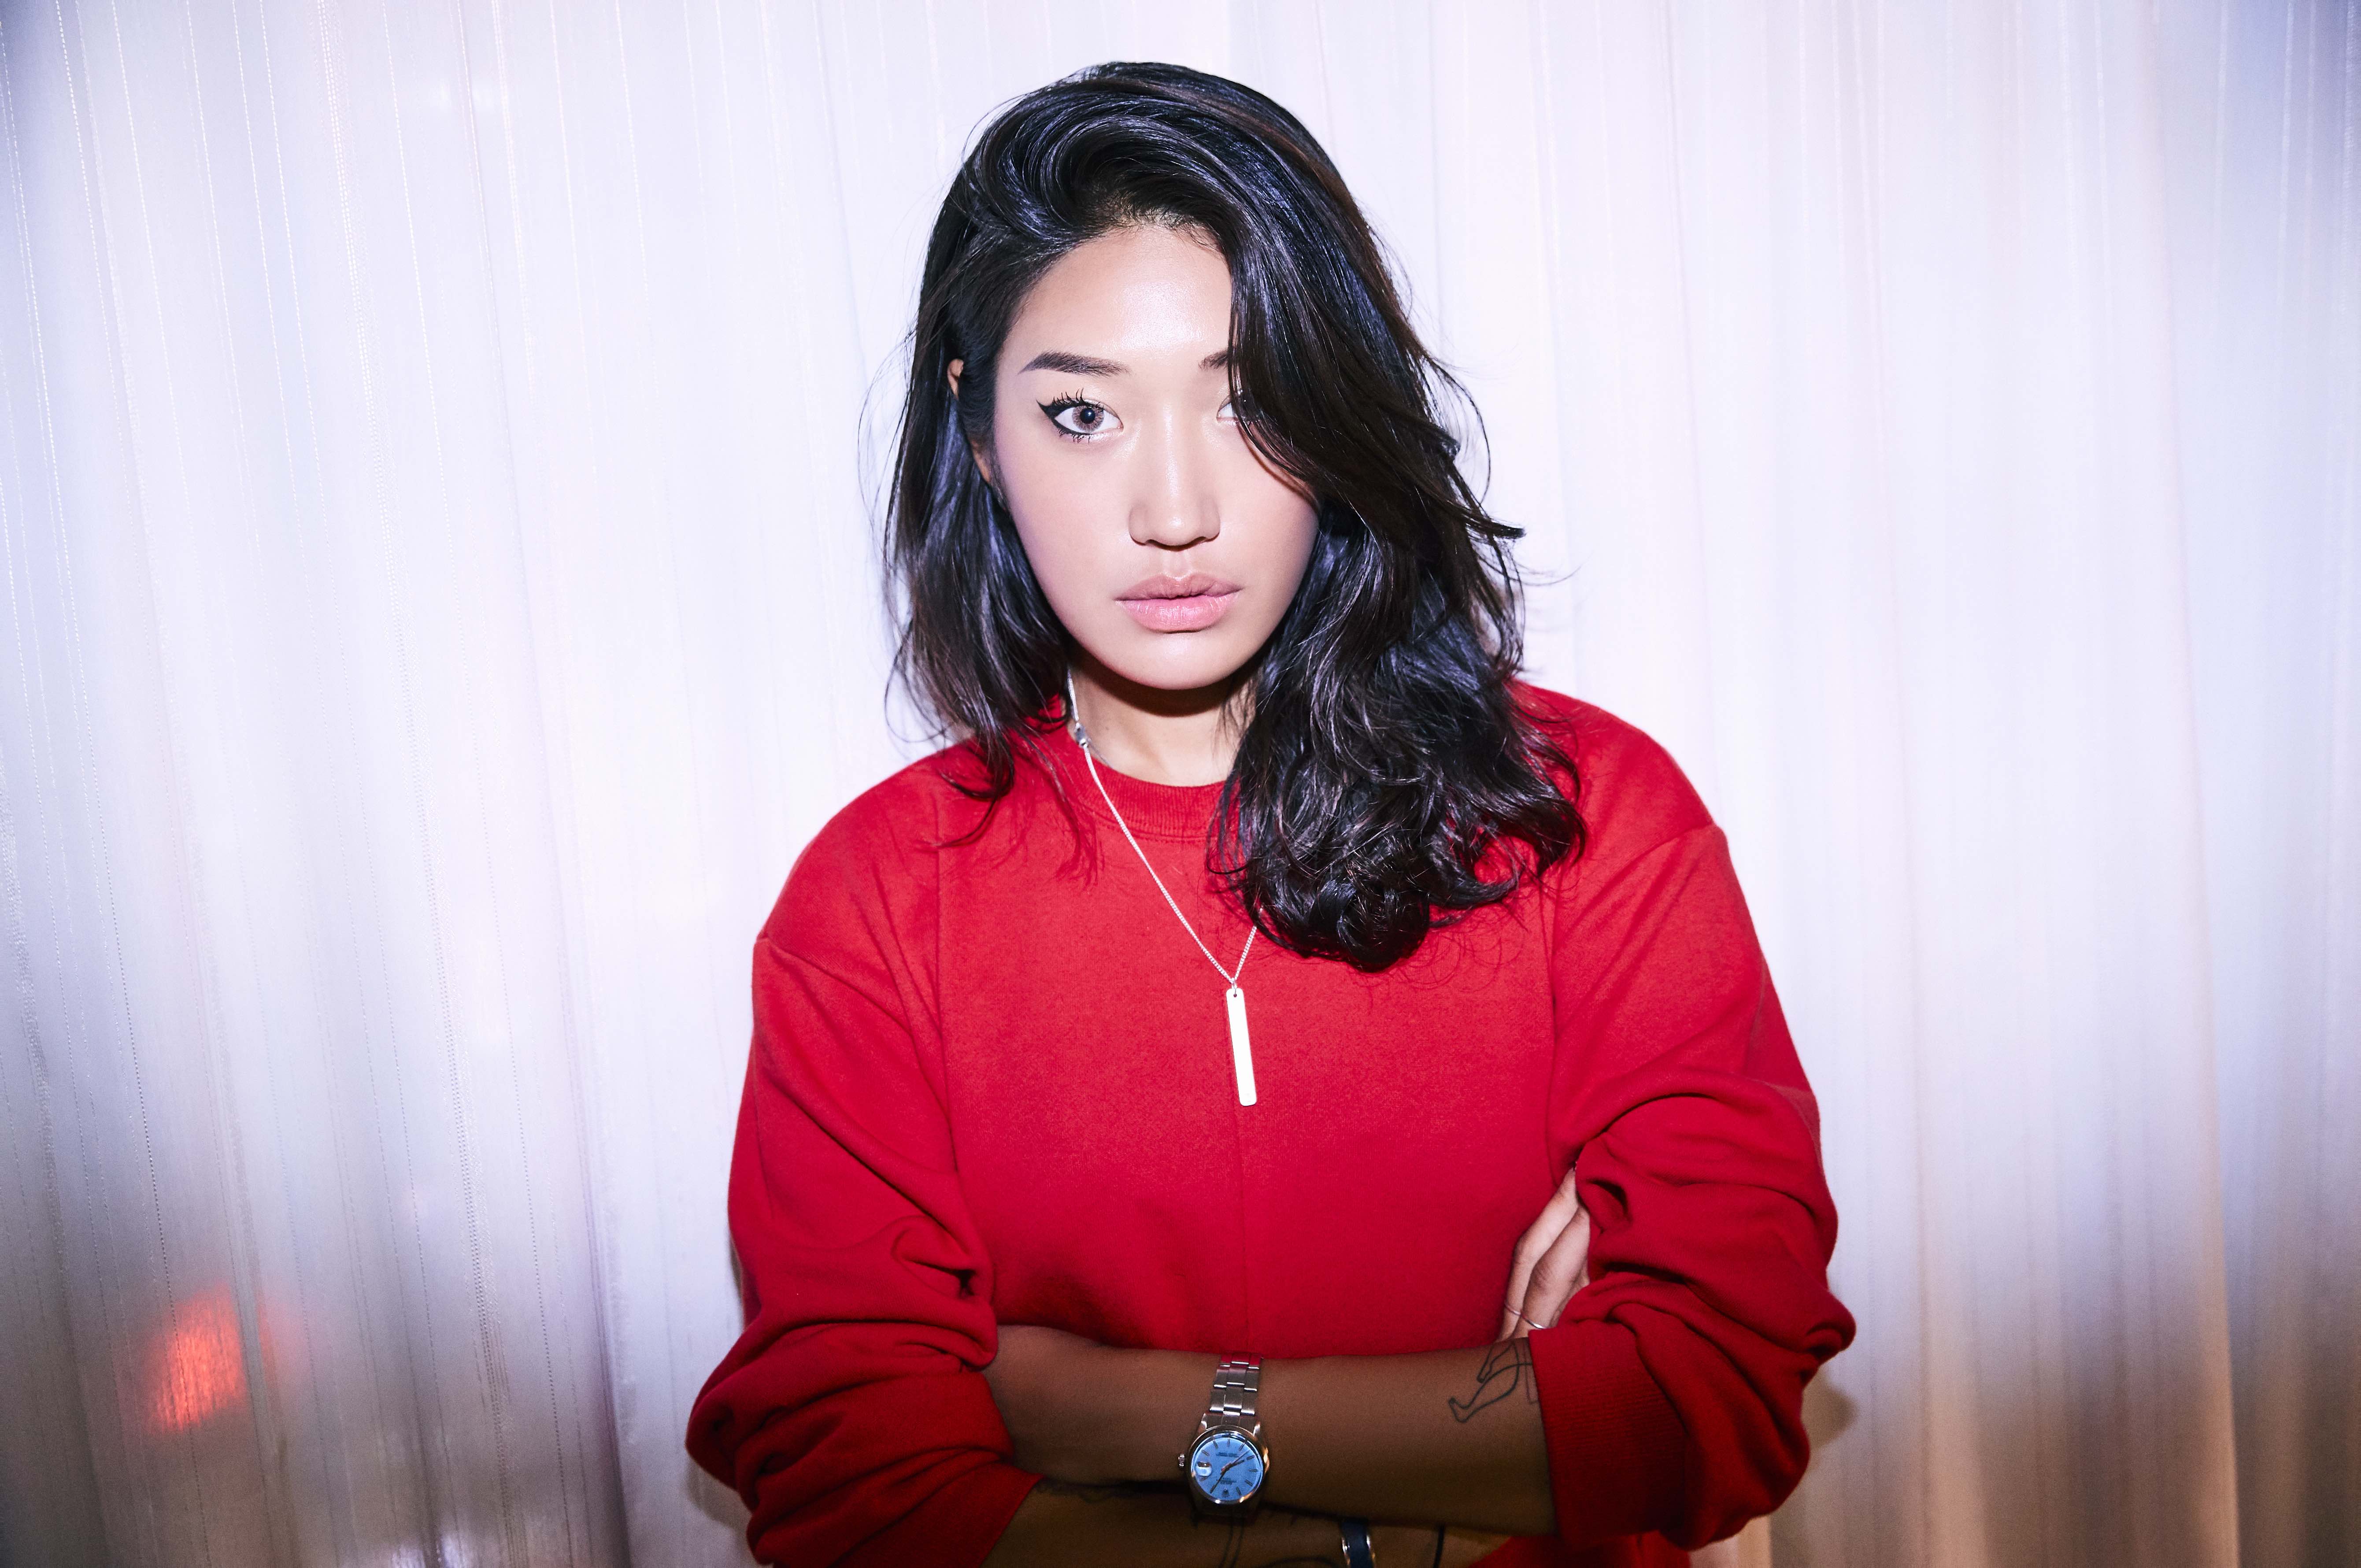 WPGM Recommends: Peggy Gou - WE PLUG GOOD MUSIC